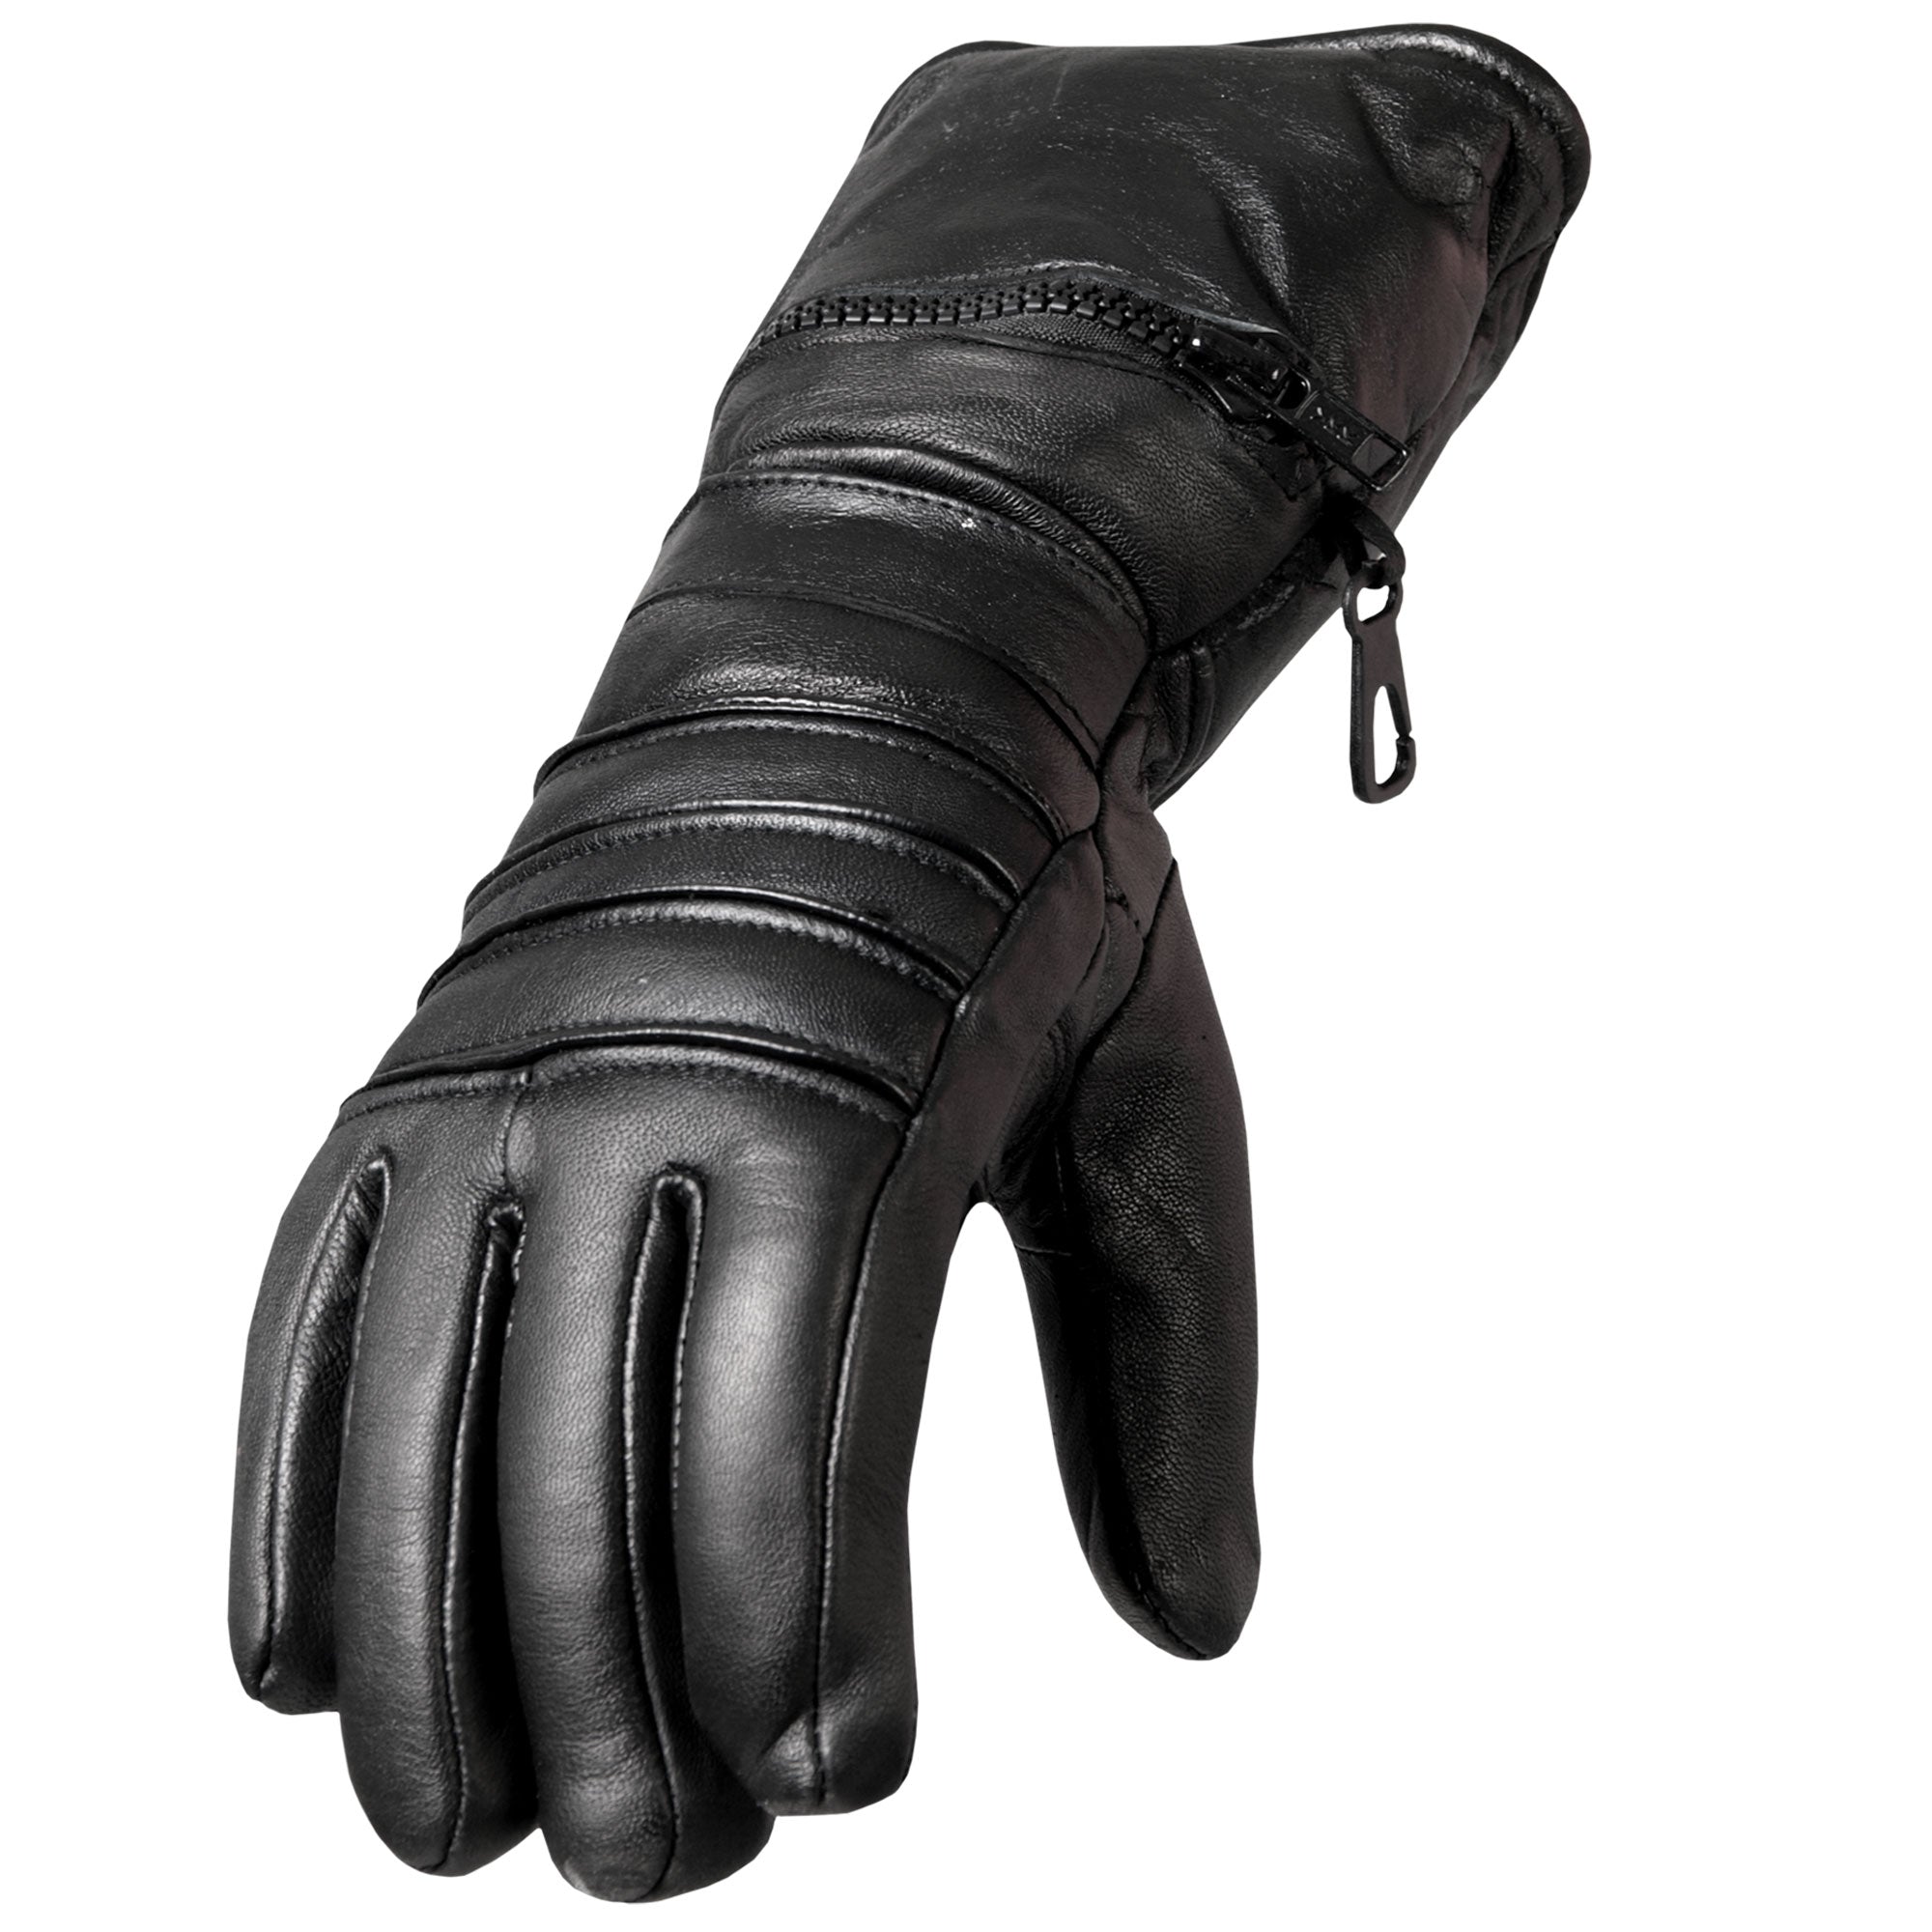 Hot Leathers GVM1001 Men's Black Leather Gauntlet Glove with Quilted Lining